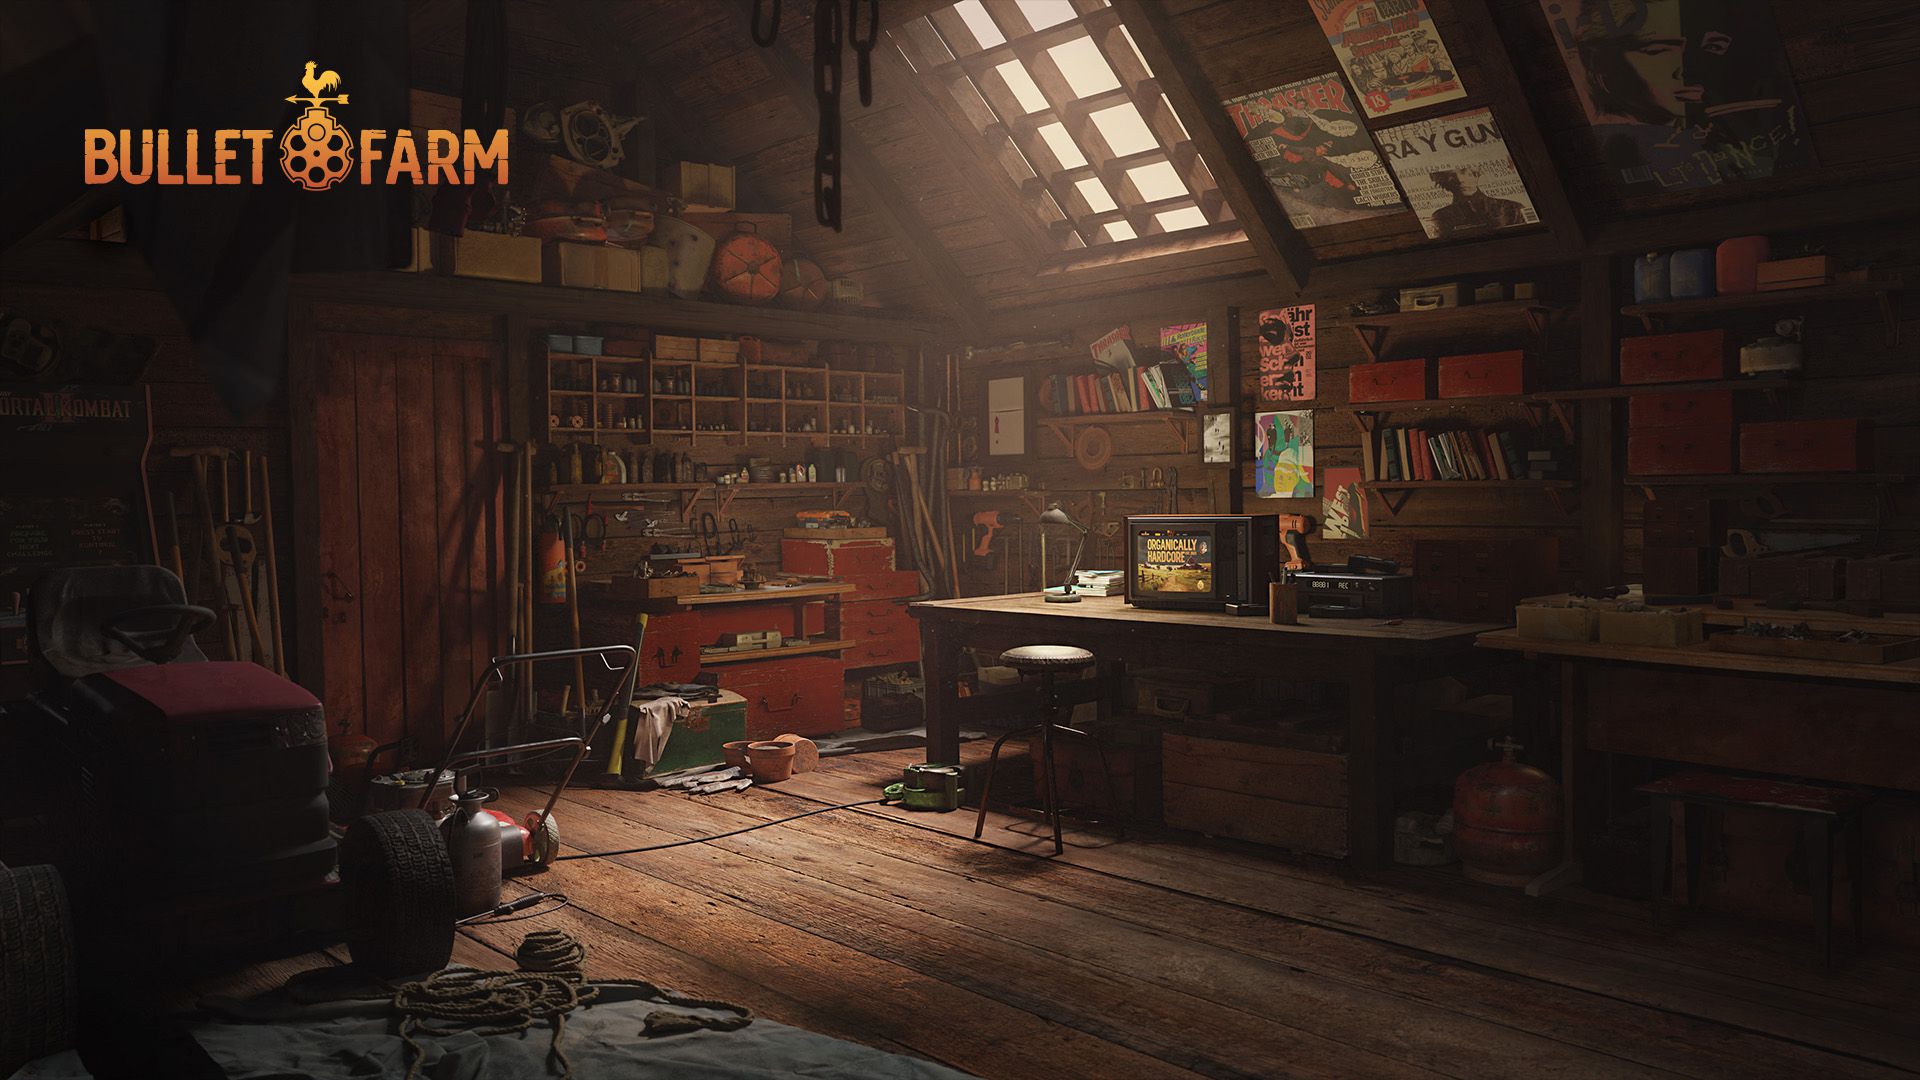 Artwork showing the interior of a barn, which is filled with tools, machinery, a TV, and books and magazines, with the BulletFarm logo in the upper left